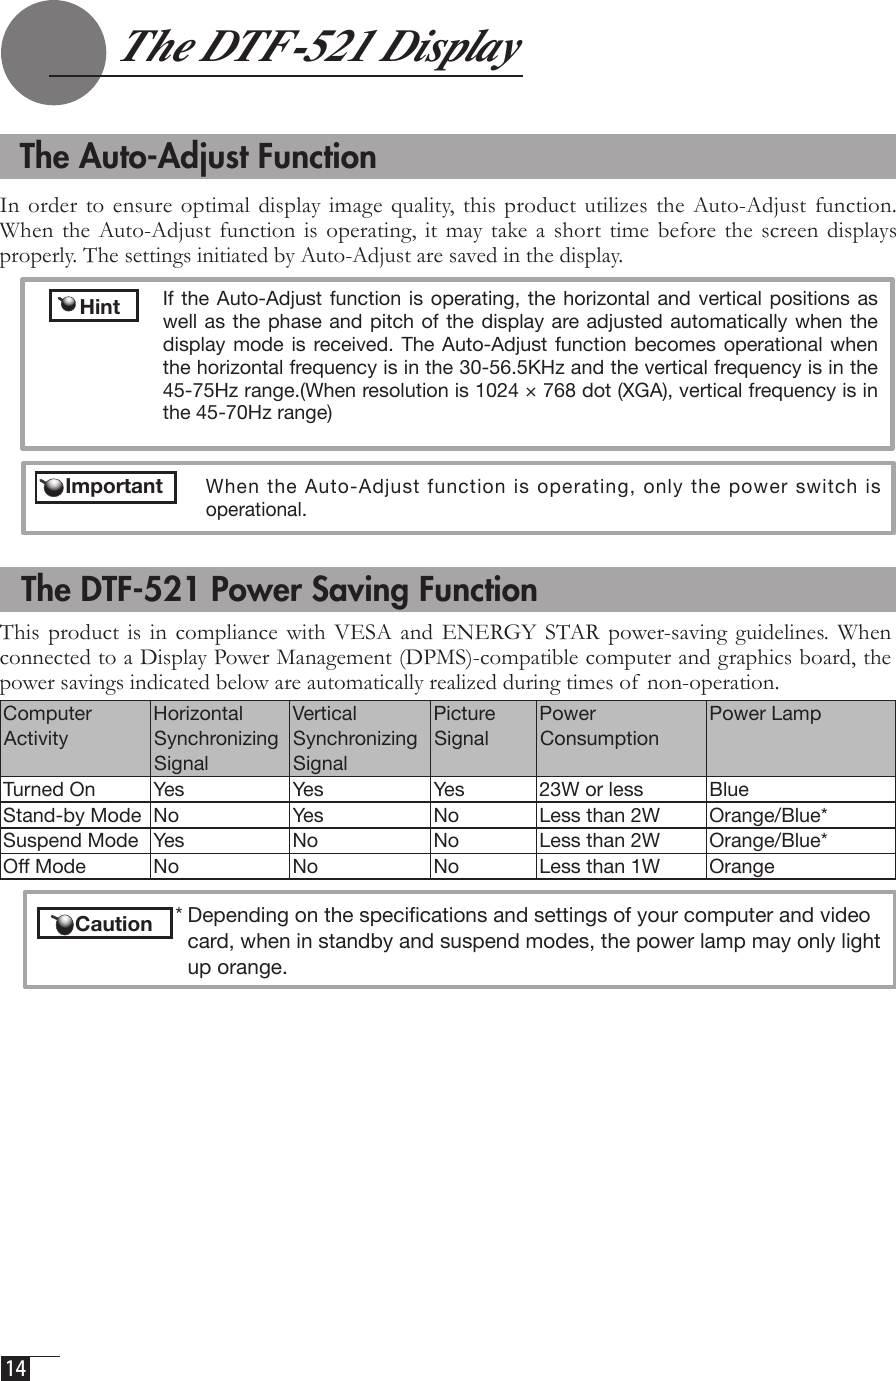  14     The DTF-521 Display * Depending on the speciﬁcations and settings of your computer and video  card, when in standby and suspend modes, the power lamp may only light  up orange.This  product  is  in compliance  with  VESA and  ENERGY  STAR power-saving  guidelines. When connected to a Display Power Management (DPMS)-compatible computer and graphics board, the power savings indicated below are automatically realized during times of non-operation.Computer ActivityHorizontal Synchronizing SignalVertical Synchronizing SignalPicture SignalPower ConsumptionPower LampTurned On Yes Yes Yes 23W or less BlueStand-by Mode No Yes No Less than 2W  Orange/Blue*Suspend Mode Yes No No Less than 2W  Orange/Blue*Off Mode No No No Less than 1W  Orange The DTF-521 Power Saving Function    ImportantIn order  to ensure optimal display  image  quality,  this product utilizes the Auto-Adjust function. When  the  Auto-Adjust  function  is operating, it  may  take a short  time  before  the  screen  displays properly. The settings initiated by Auto-Adjust are saved in the display.  If  the Auto-Adjust function  is operating, the  horizontal and vertical  positions as well as the phase  and pitch of the display are adjusted automatically  when the display mode  is received. The  Auto-Adjust function  becomes operational when the horizontal frequency is in the 30-56.5KHz and the vertical frequency is in the 45-75Hz range.(When resolution is 1024 × 768 dot (XGA), vertical frequency is in the 45-70Hz range)  When the Auto-Adjust function is operating, only the power switch is operational.   The Auto-Adjust Function    Hint     Caution